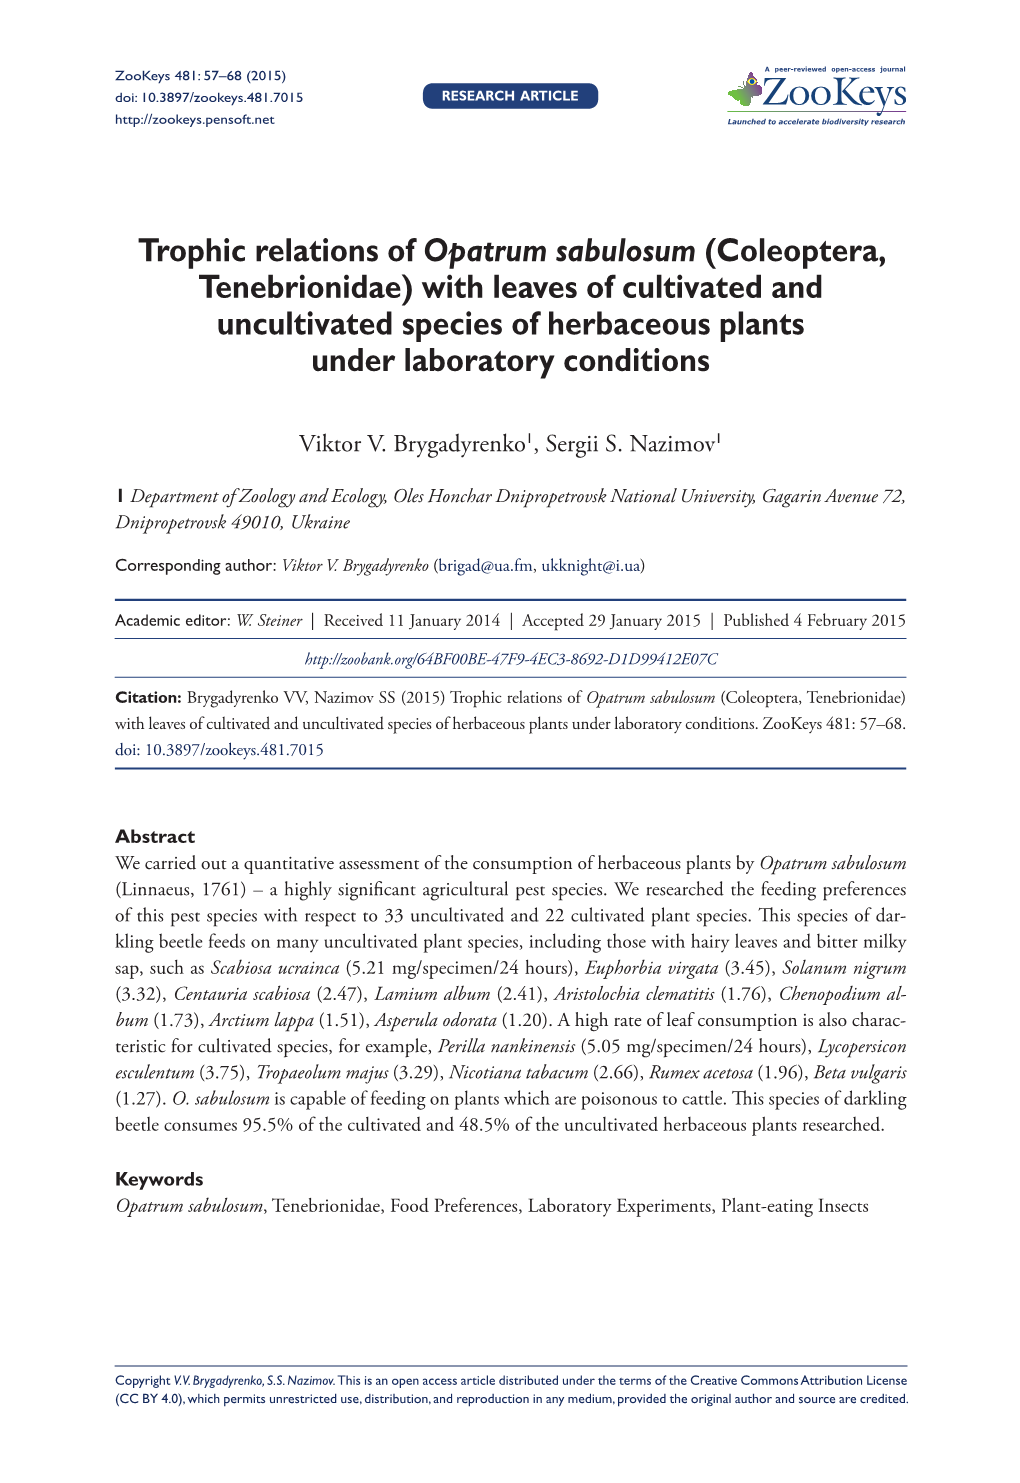 Trophic Relations of Opatrum Sabulosum (Coleoptera, Tenebrionidae) with Leaves of Cultivated and Uncultivated Species of Herbaceous Plants Under Laboratory Conditions